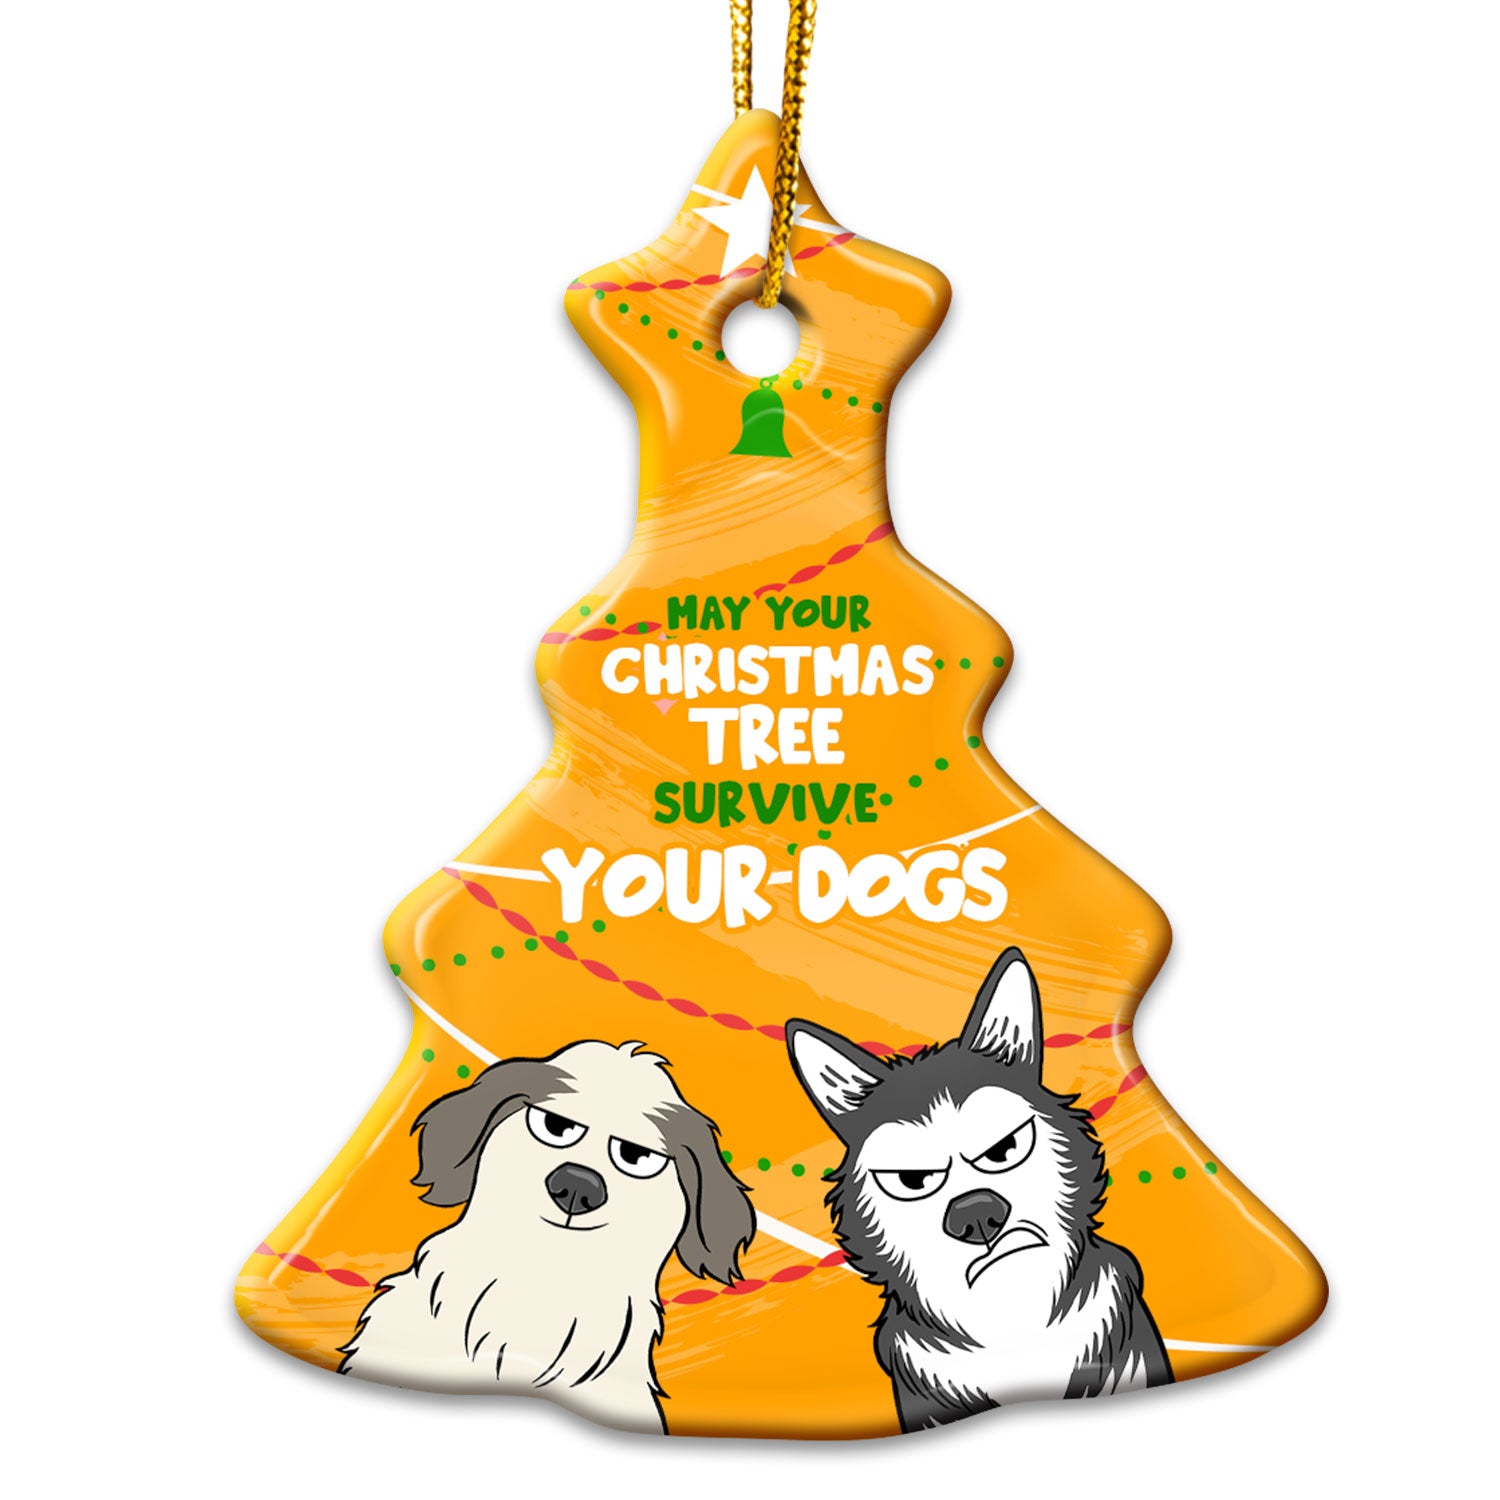 May Your Christmas Tree Survive - Gift For Dog Lovers - Personalized Tree Ceramic Ornament